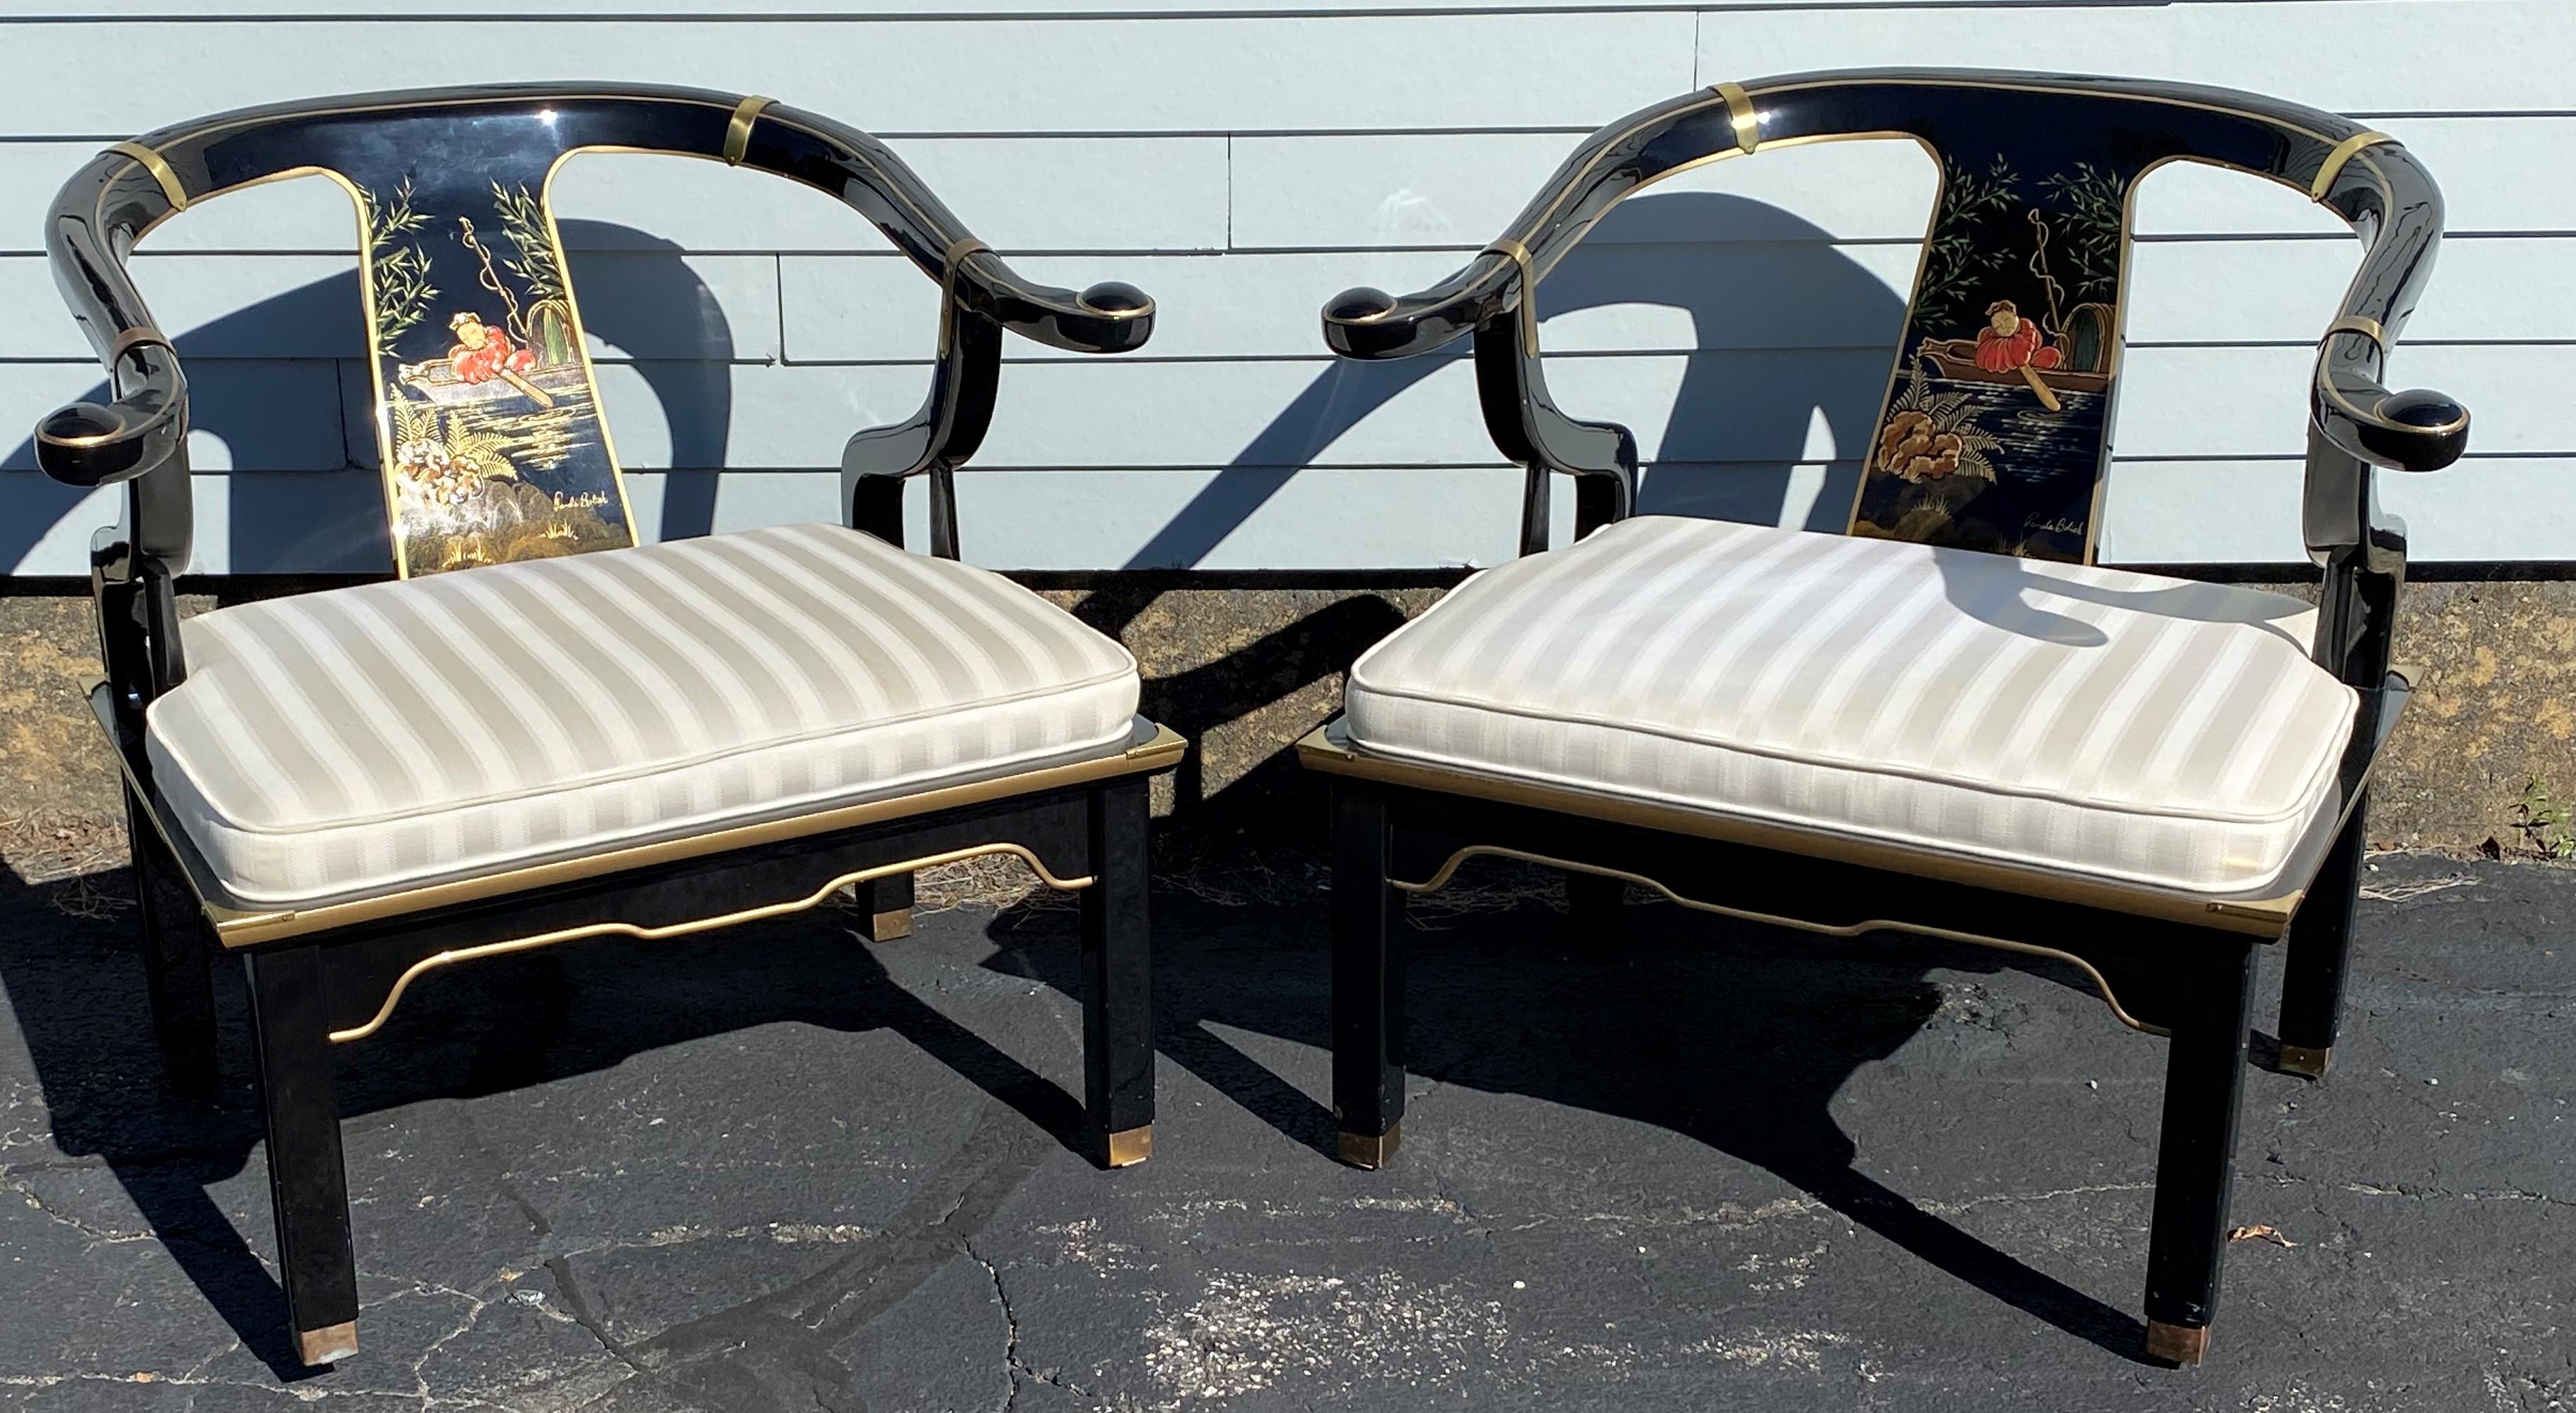 A stunning pair of James Mont style black lacquer Chinese horseshoe chairs with polychrome hand painted Asian scene splats by Brenda Bolick, gilt line highlights, brass corner, arm, and foot supports, and white satin striped upholstered seats. A